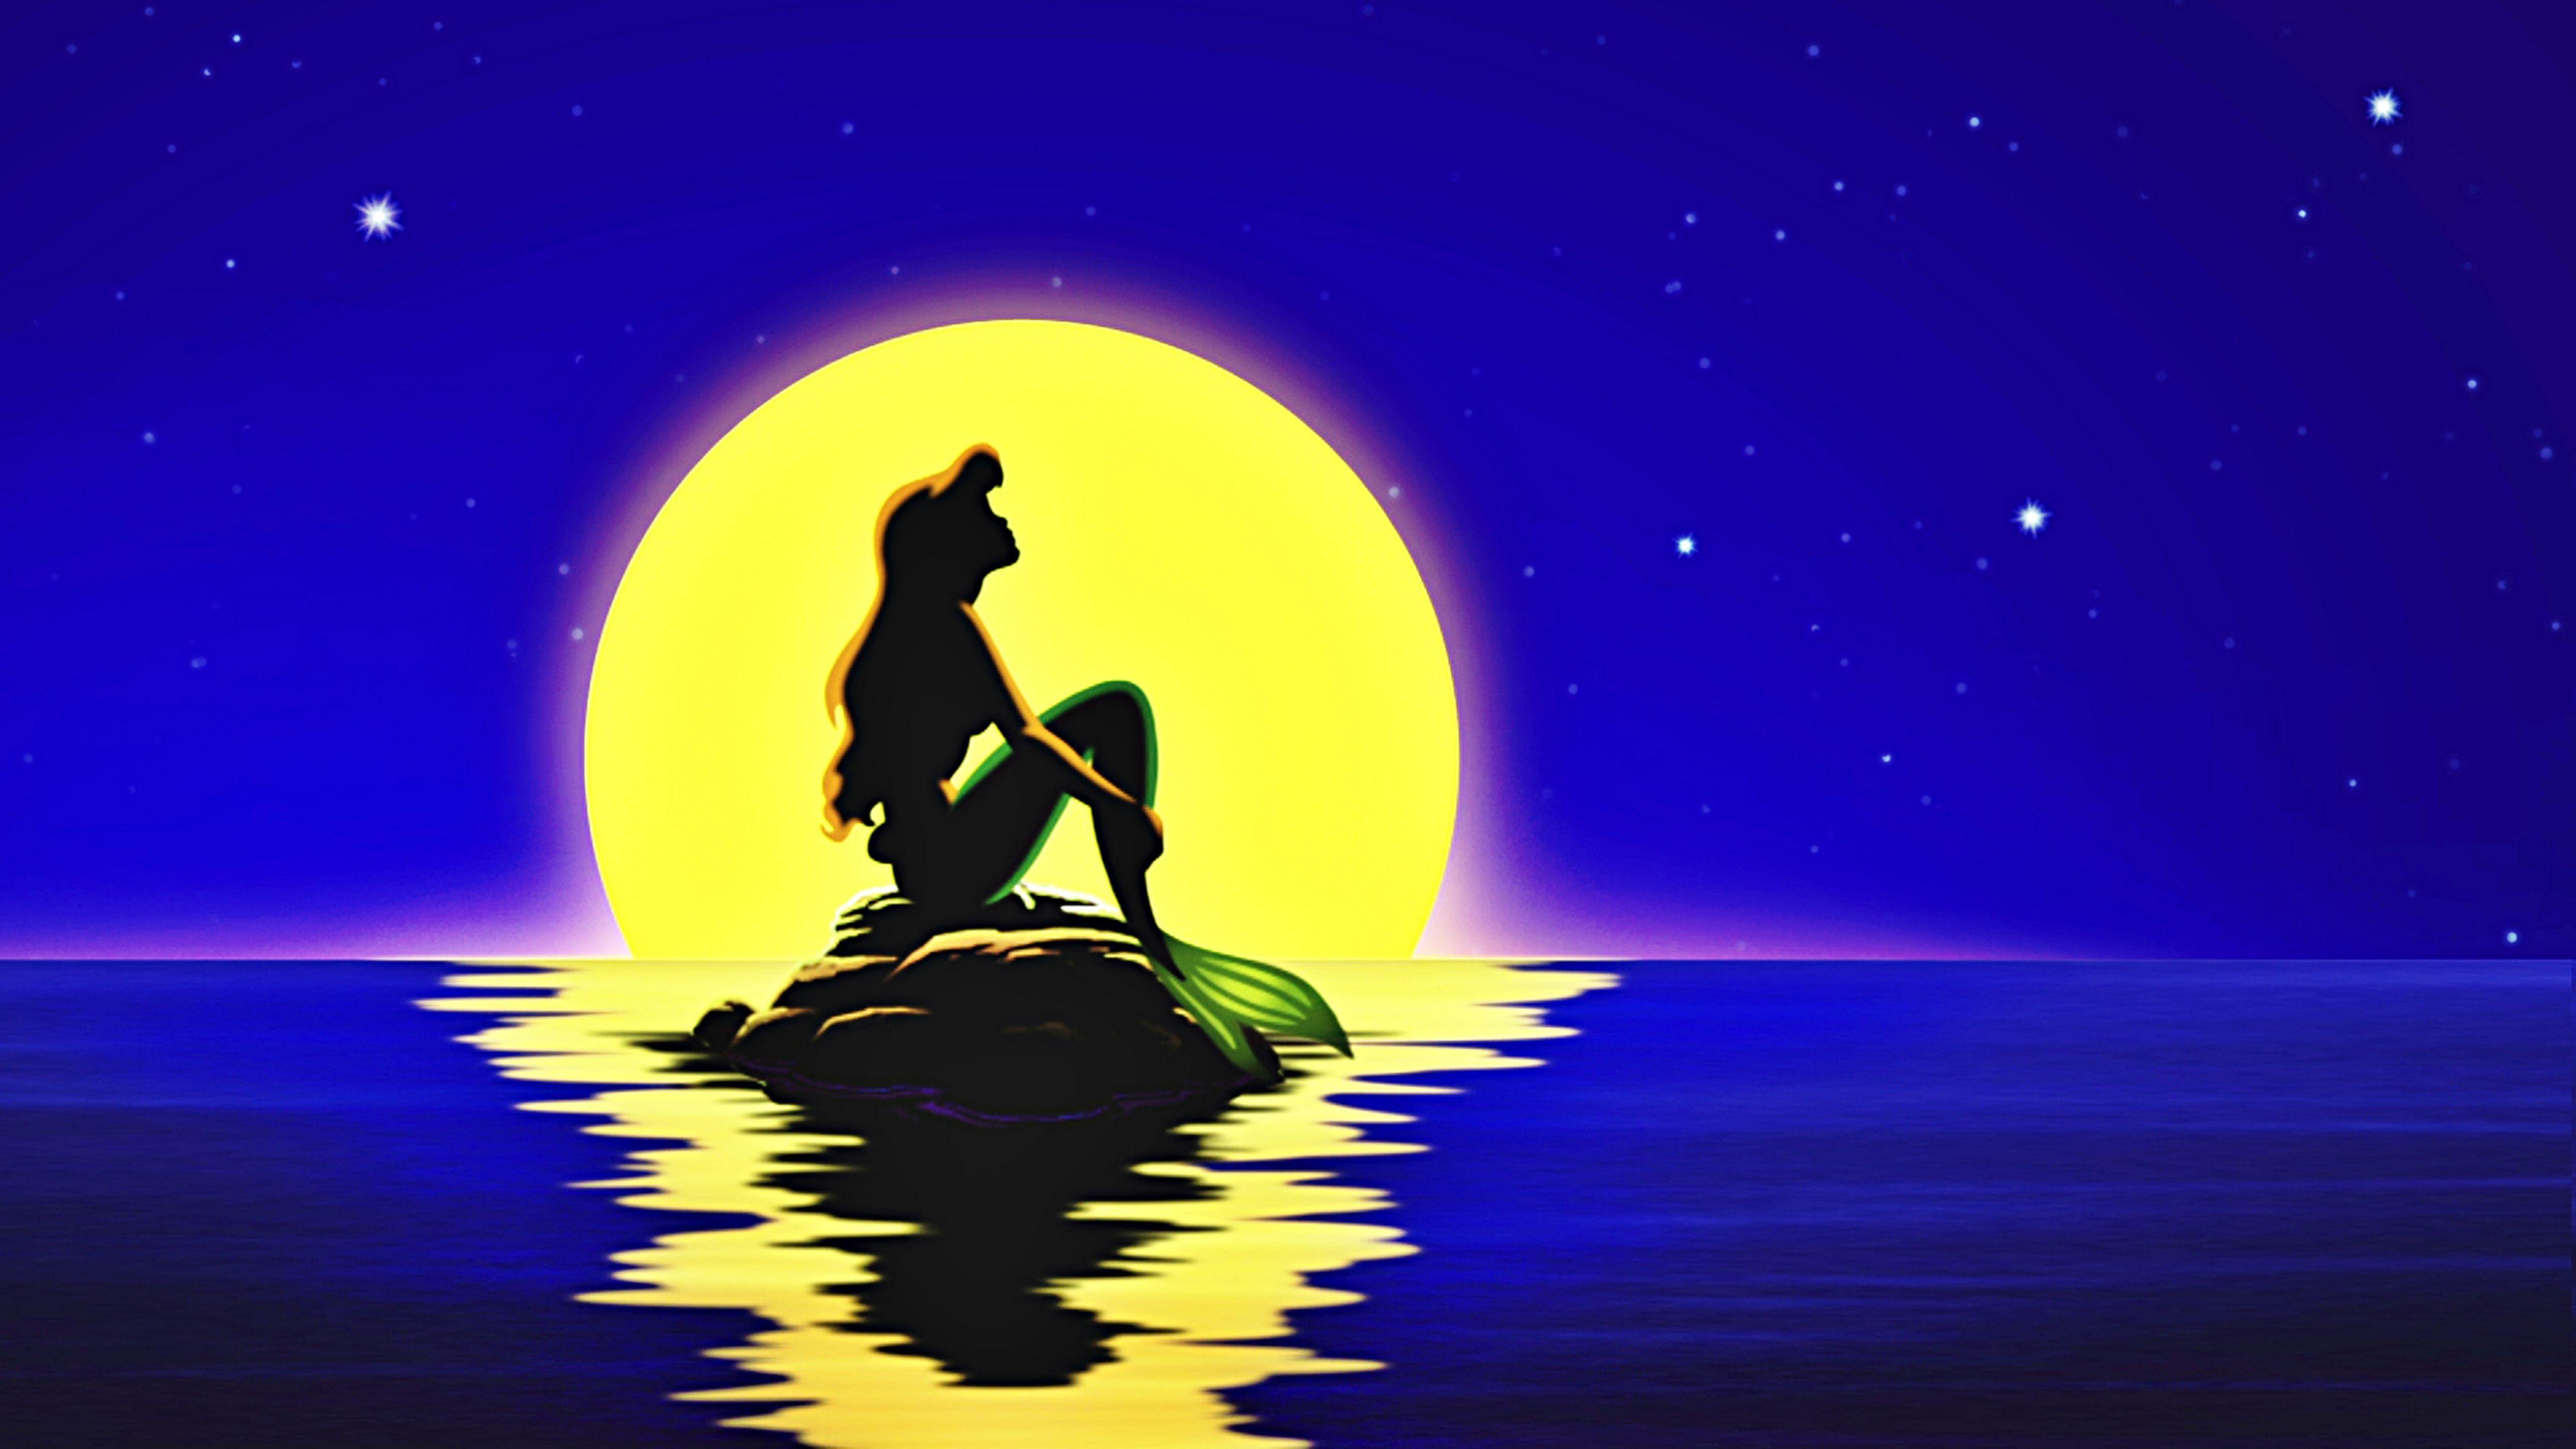 70 The Little Mermaid 1989 HD Wallpapers and Backgrounds